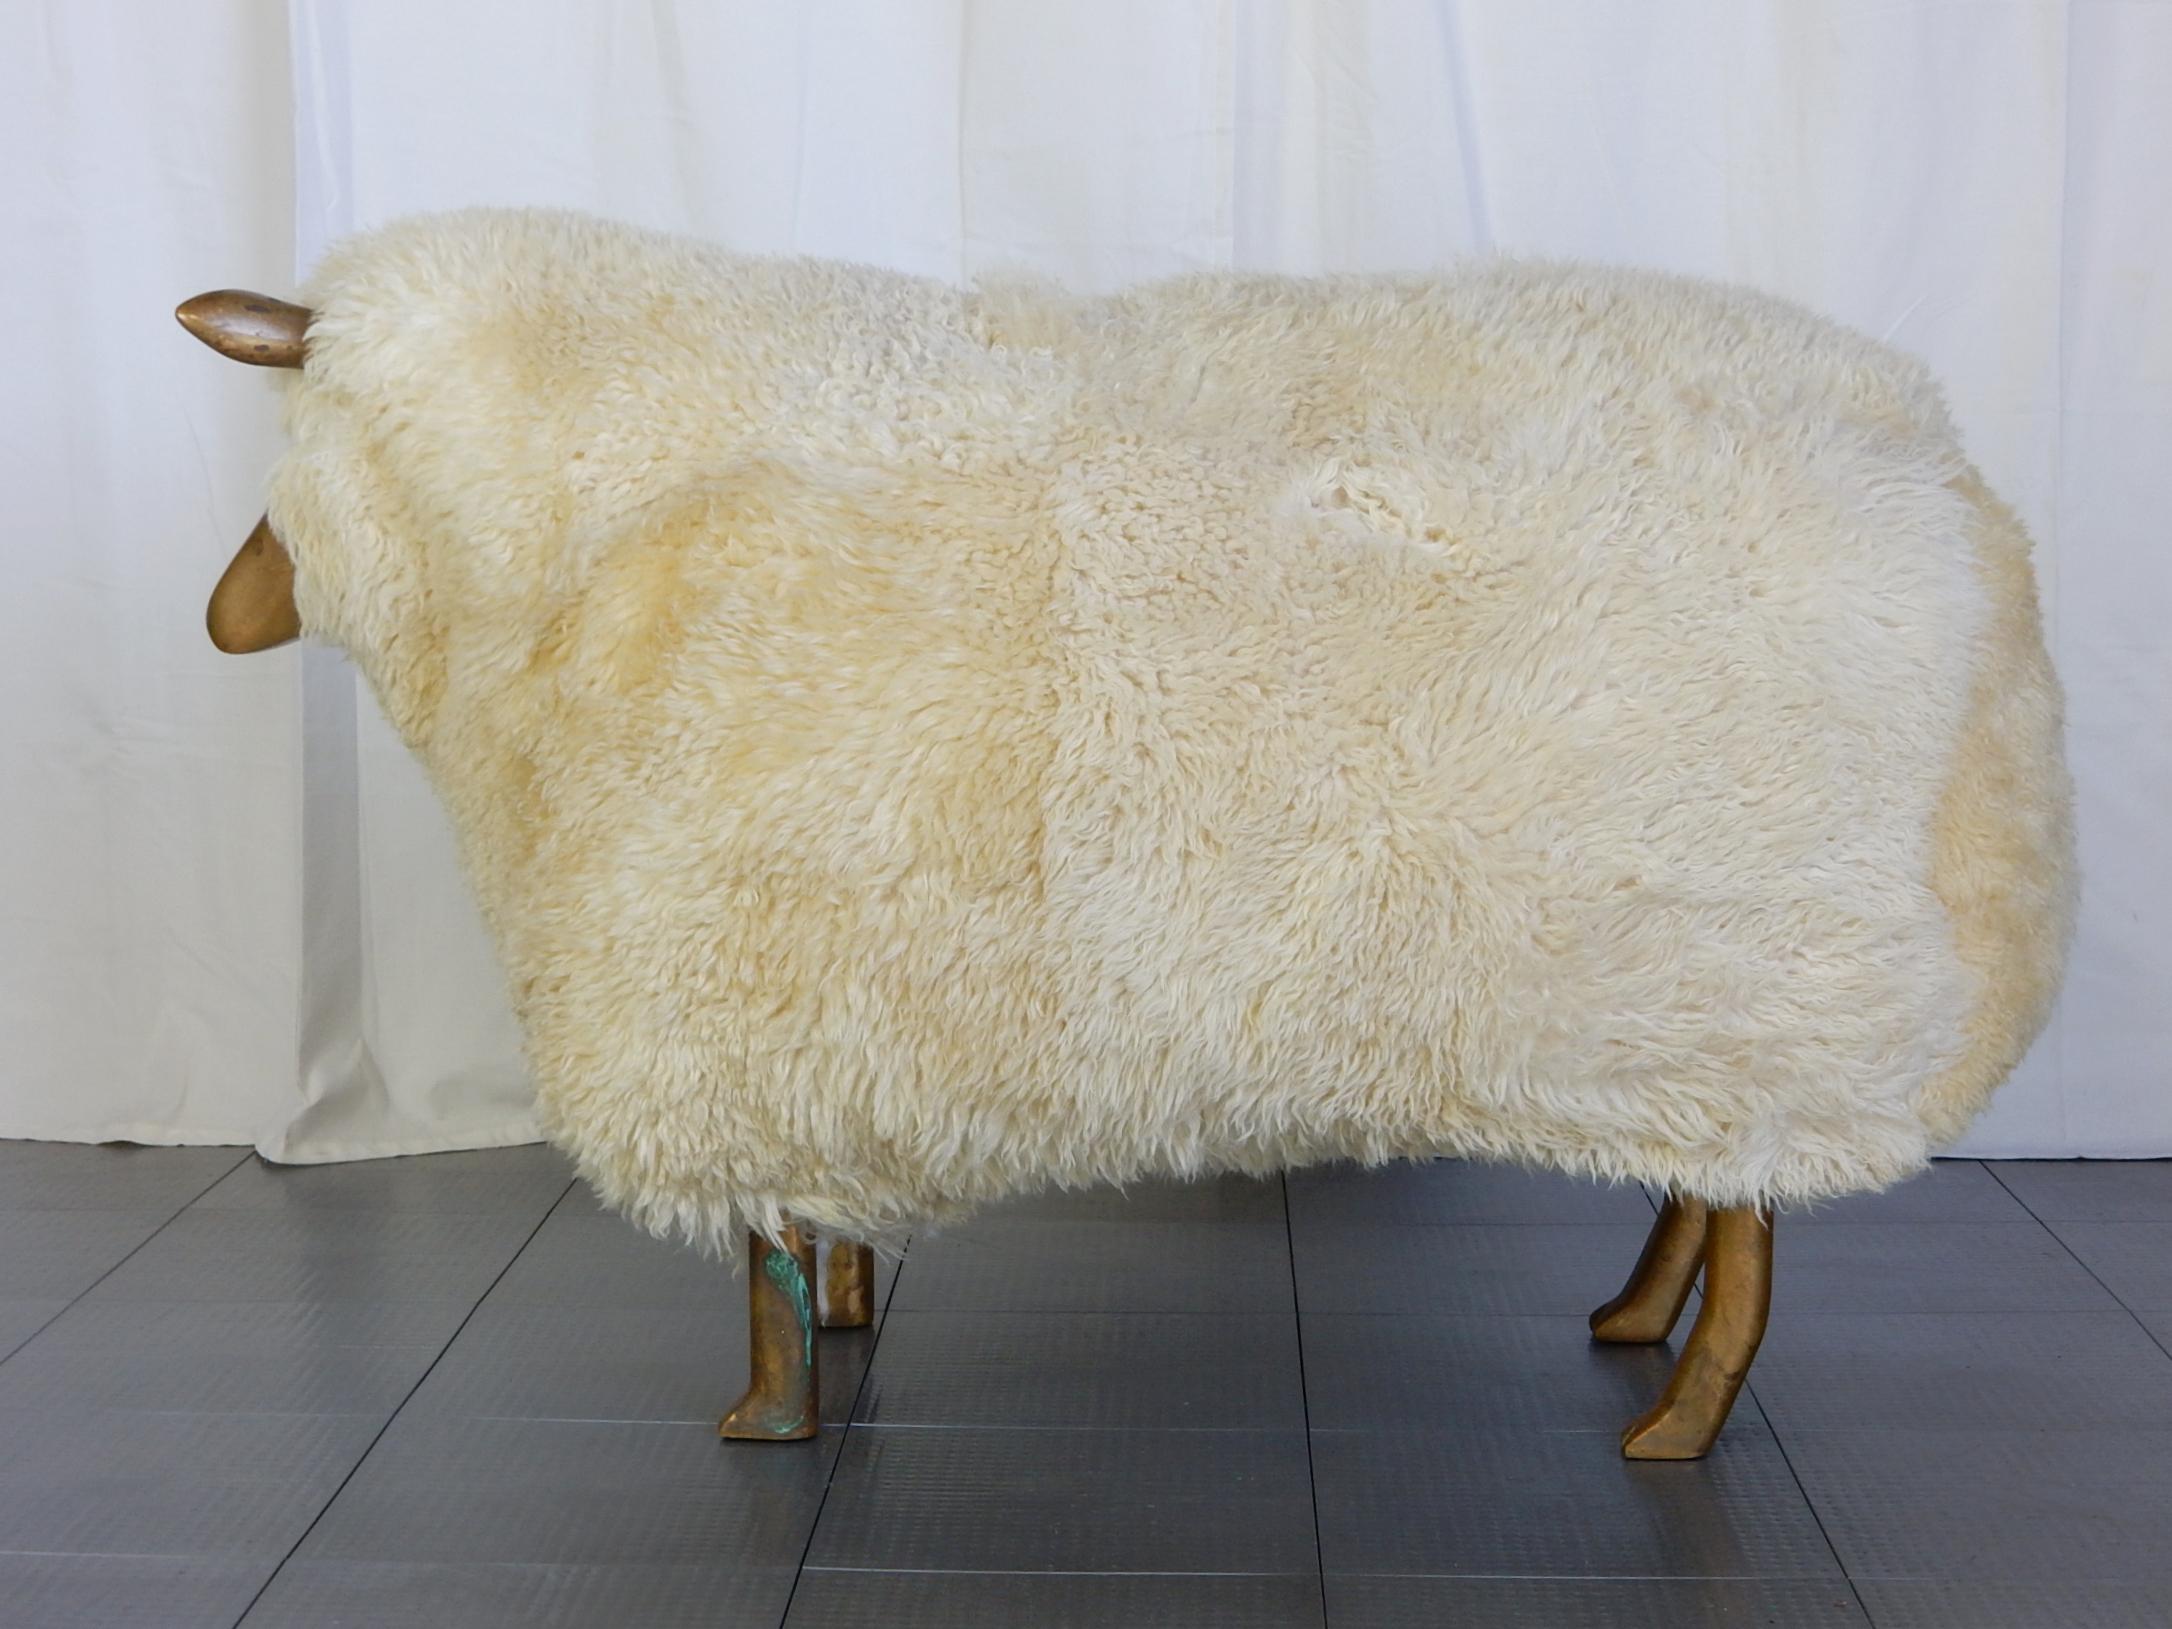 In the manner of Claude and Francois-Xavier Lalanne this life-size sheep ottoman
with solid brass legs, face and ears is circa 1970s (judging by the aged brass patina).
Thick plush real sheepskin upholstered over a foam covered wooden frame.
A